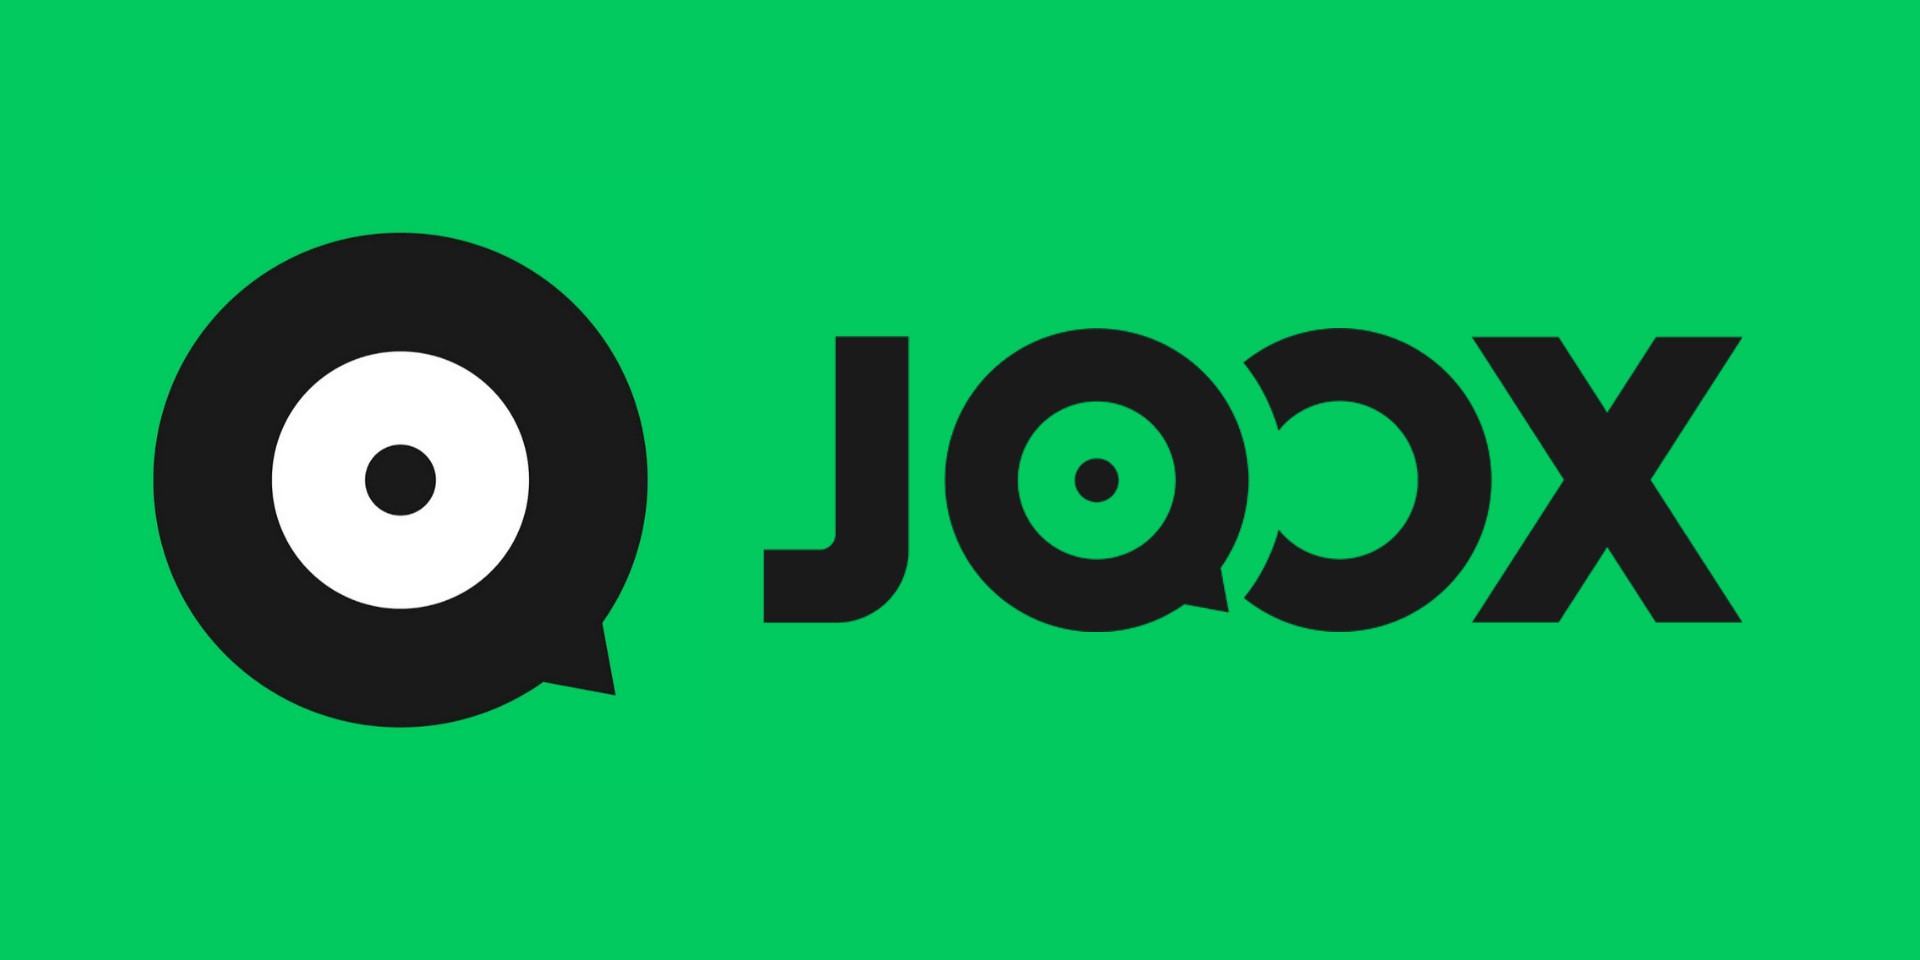 JOOX rolls out new virtual fan hangout features, Superstar Fans Pick and Artist Room